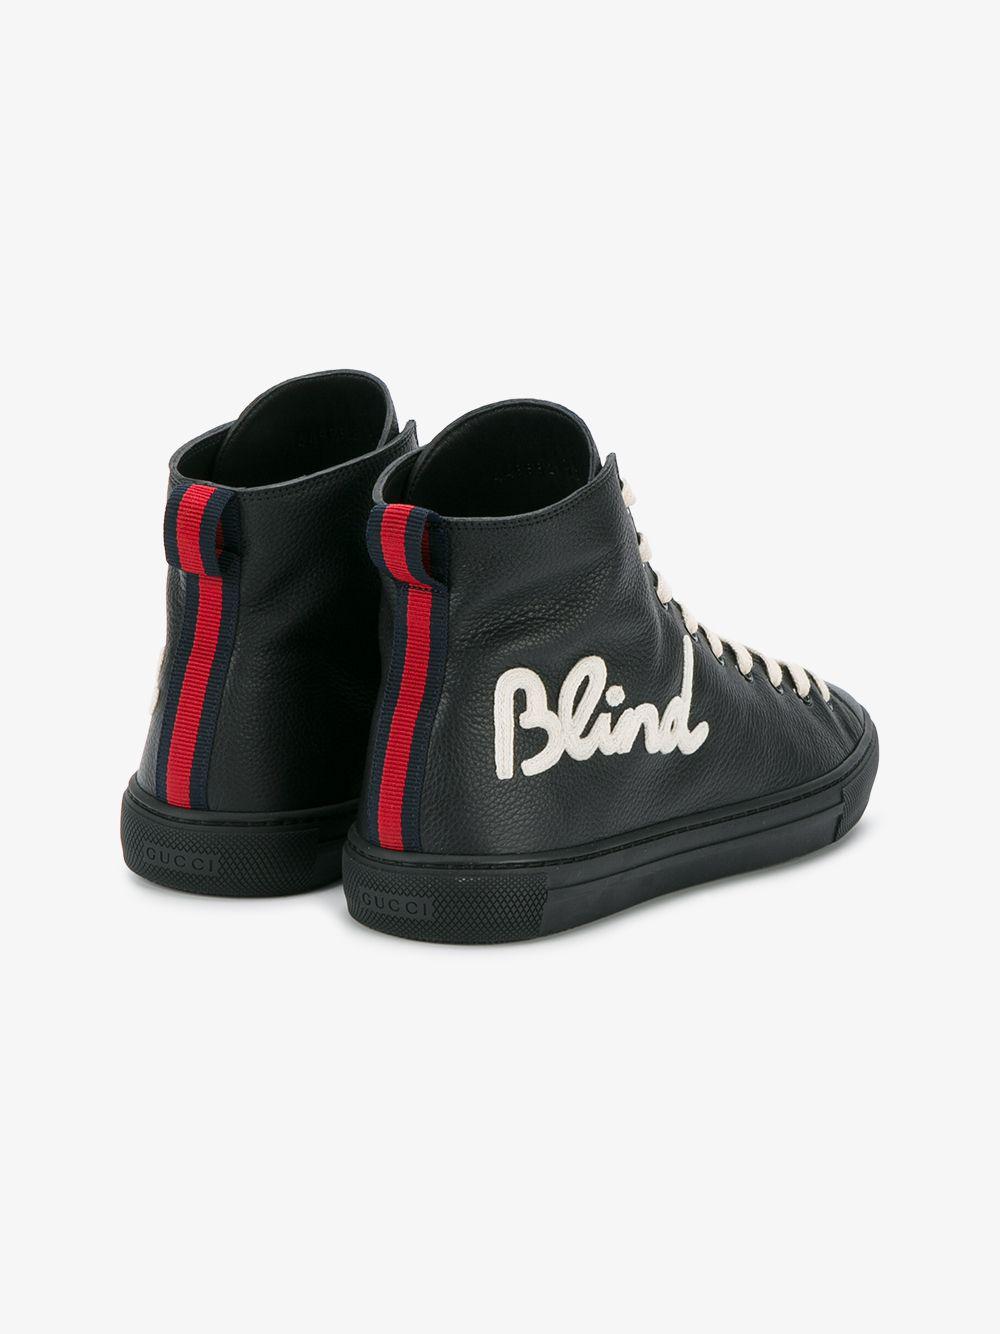 blind for love gucci shoes